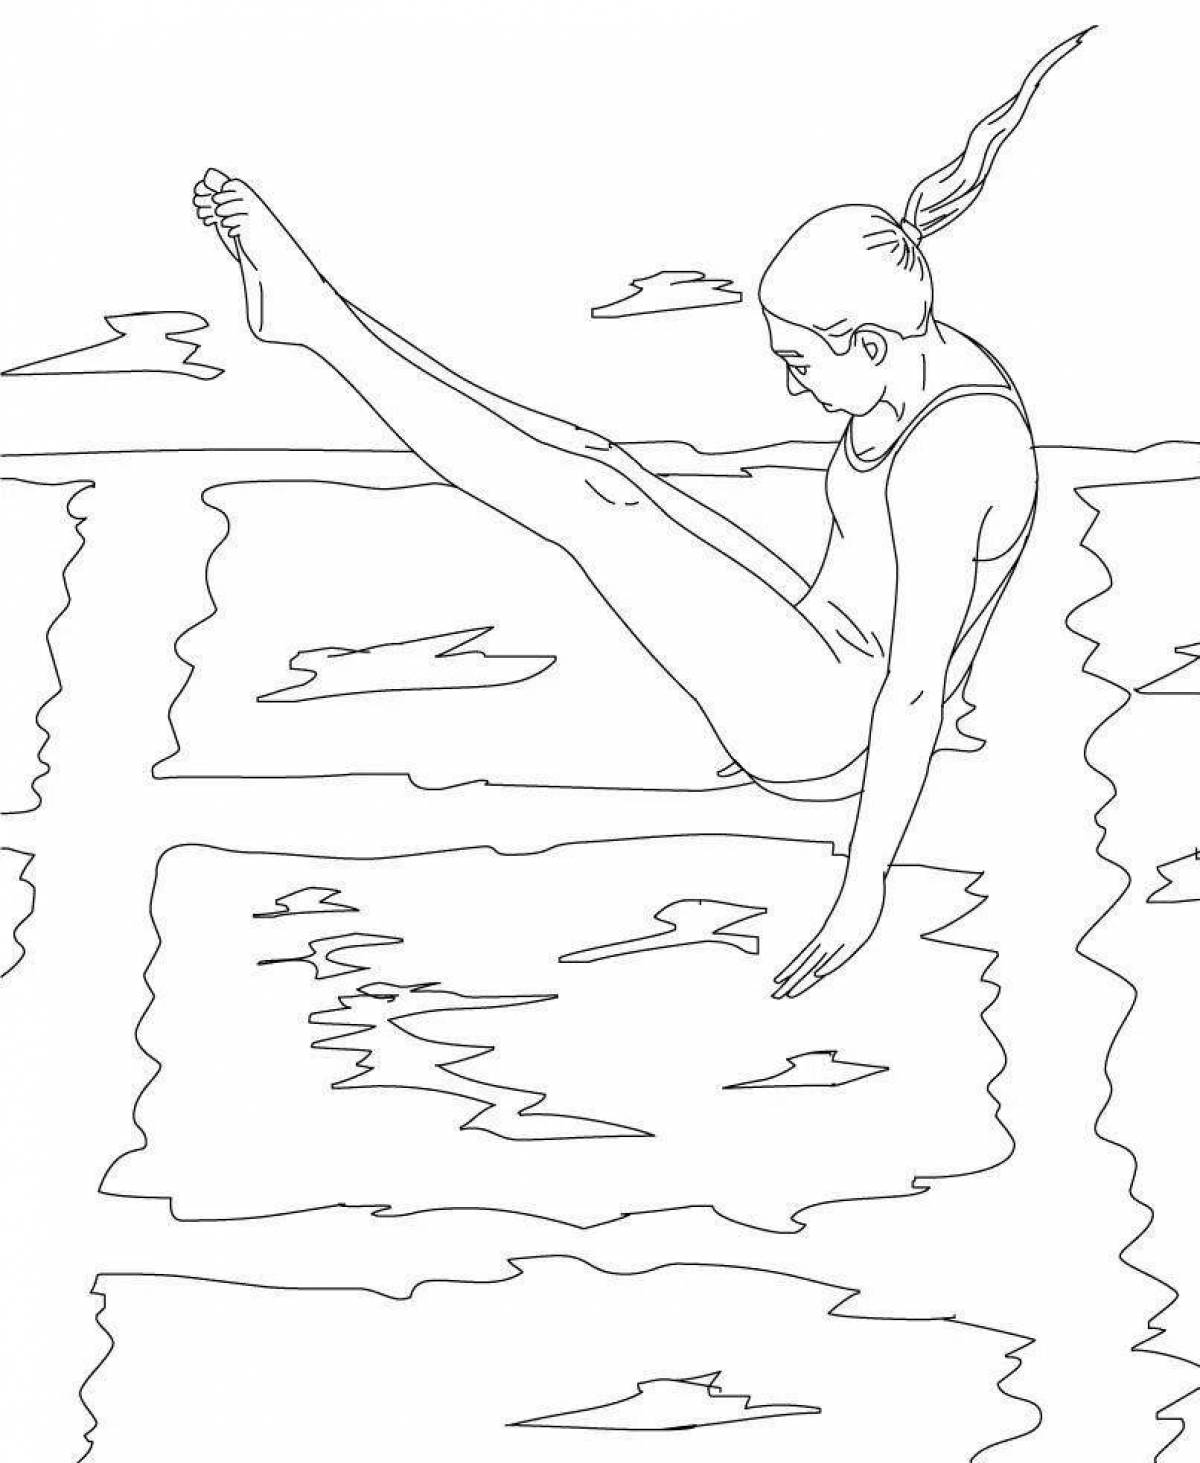 Fun coloring book for synchronized swimming